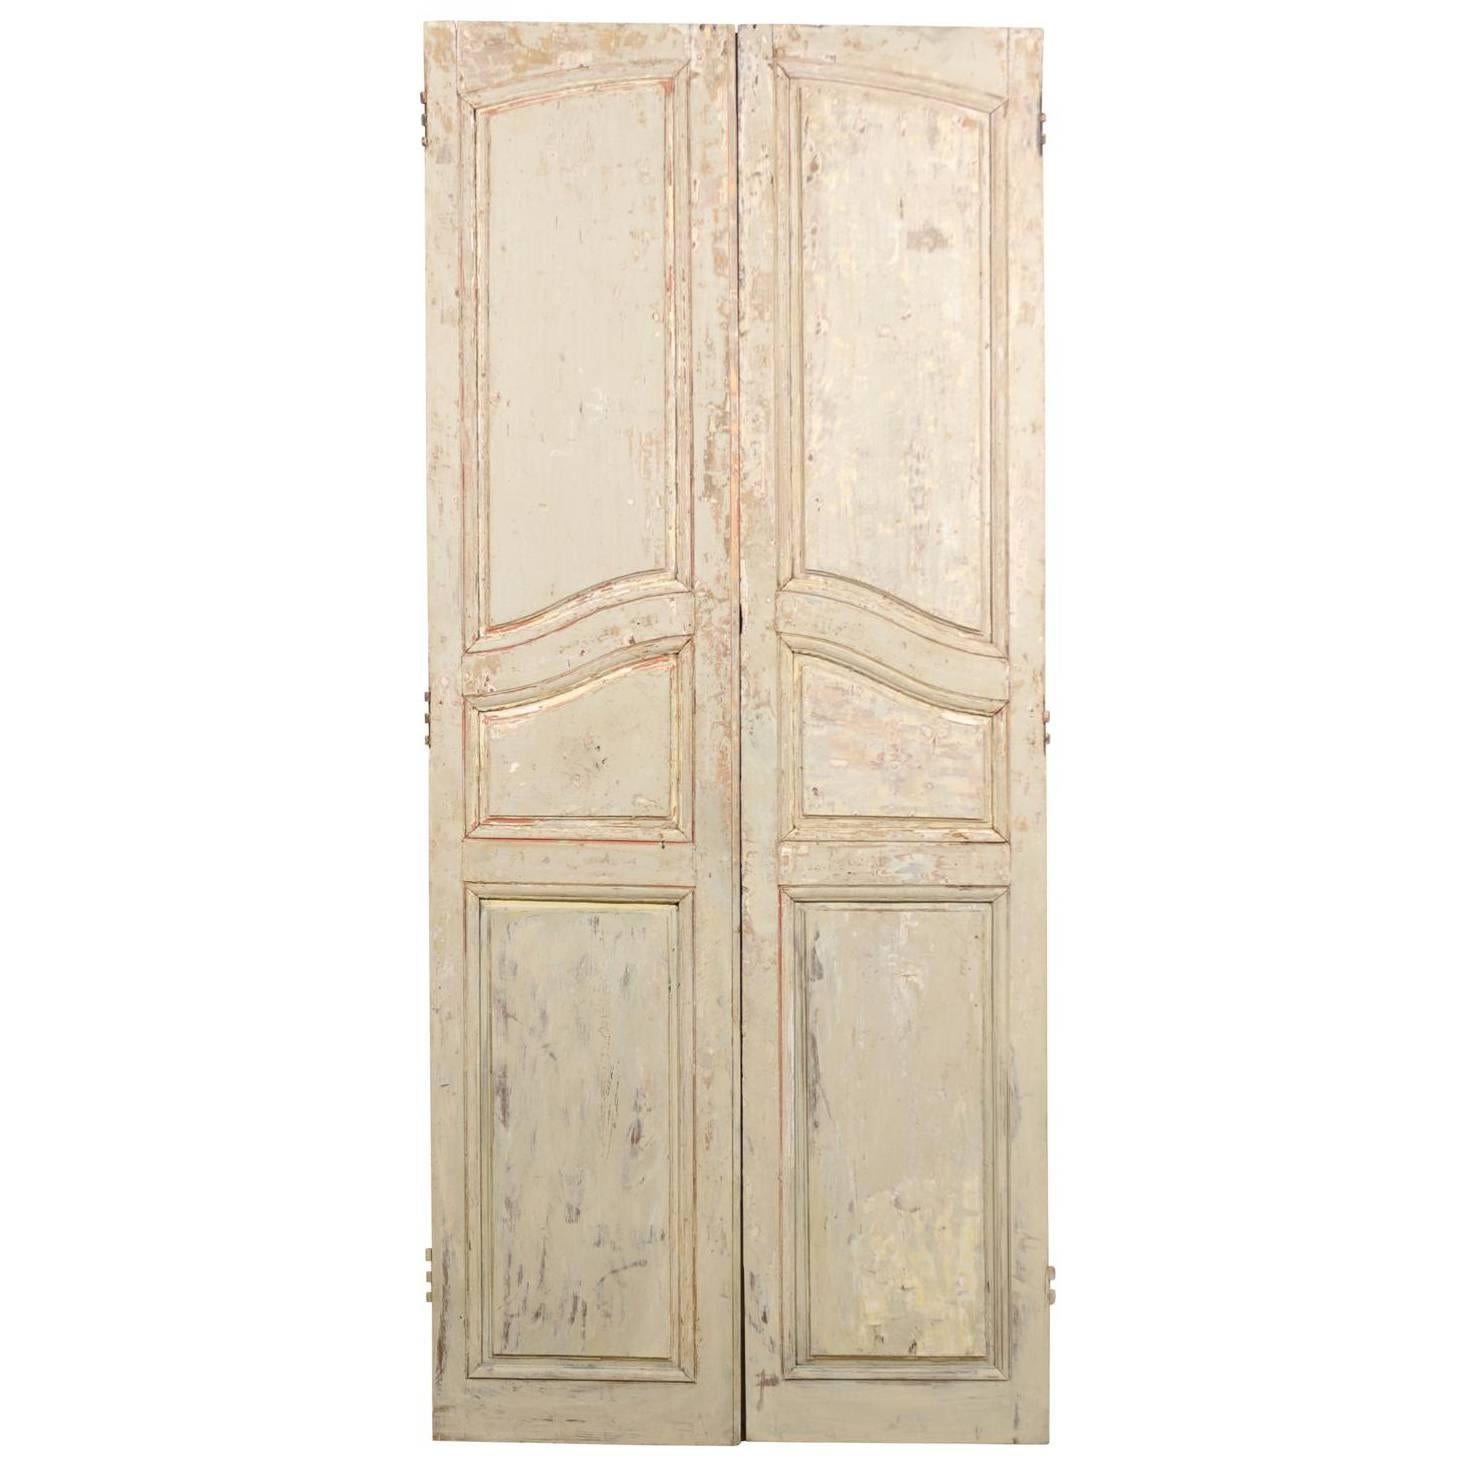 Pair of French Early 19th Century Wooden Doors